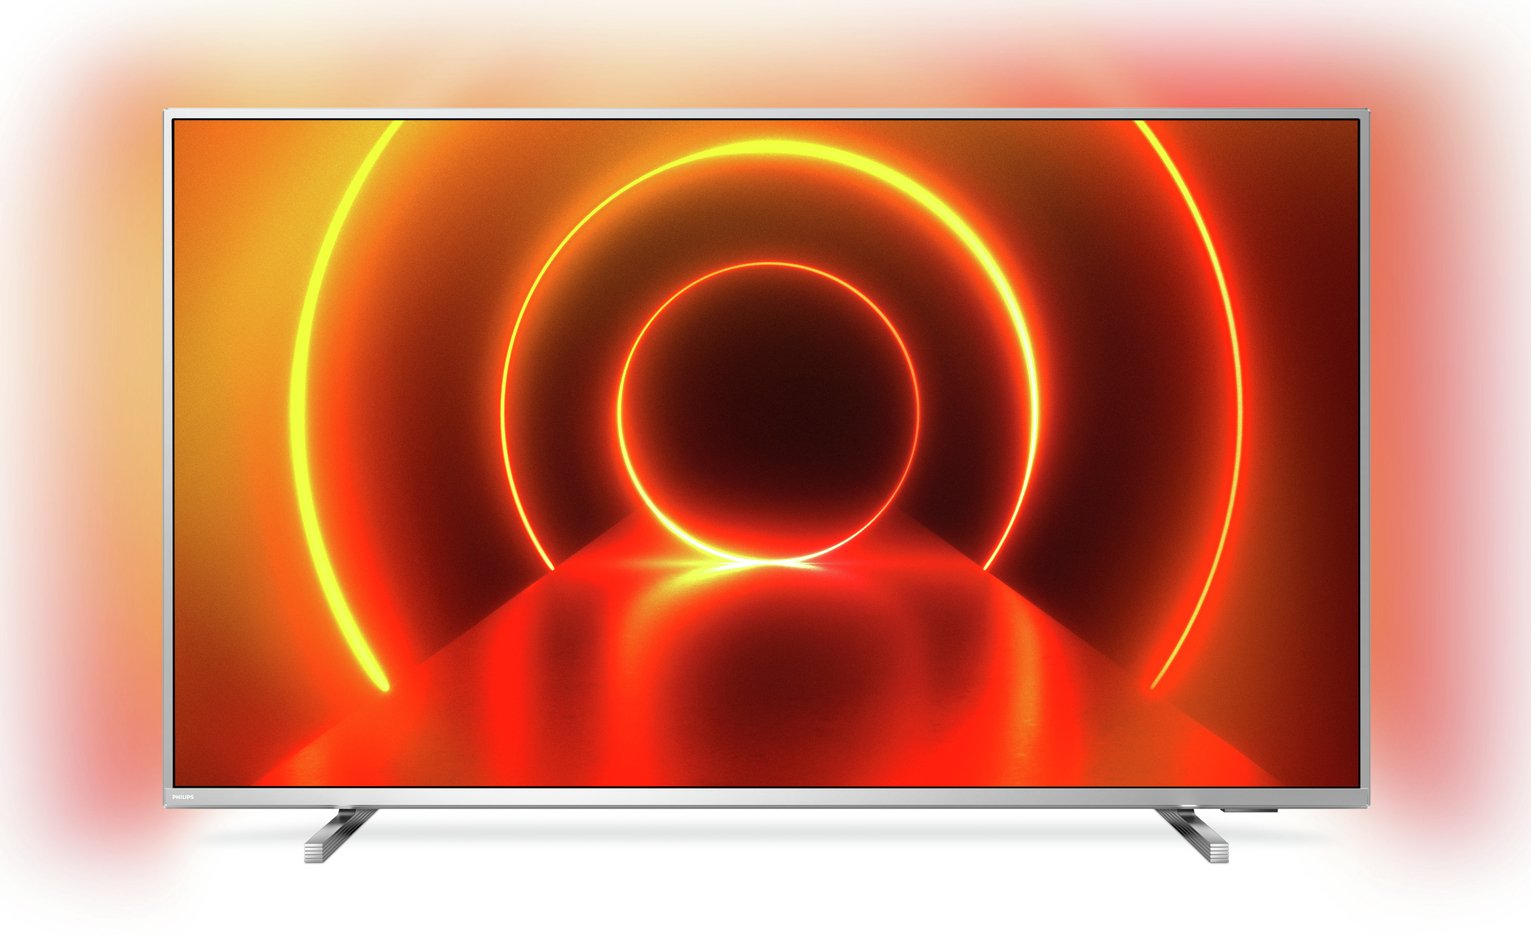 Philips 58 Inch 58PUS8105 Smart 4K Ultra HD LED TV Review